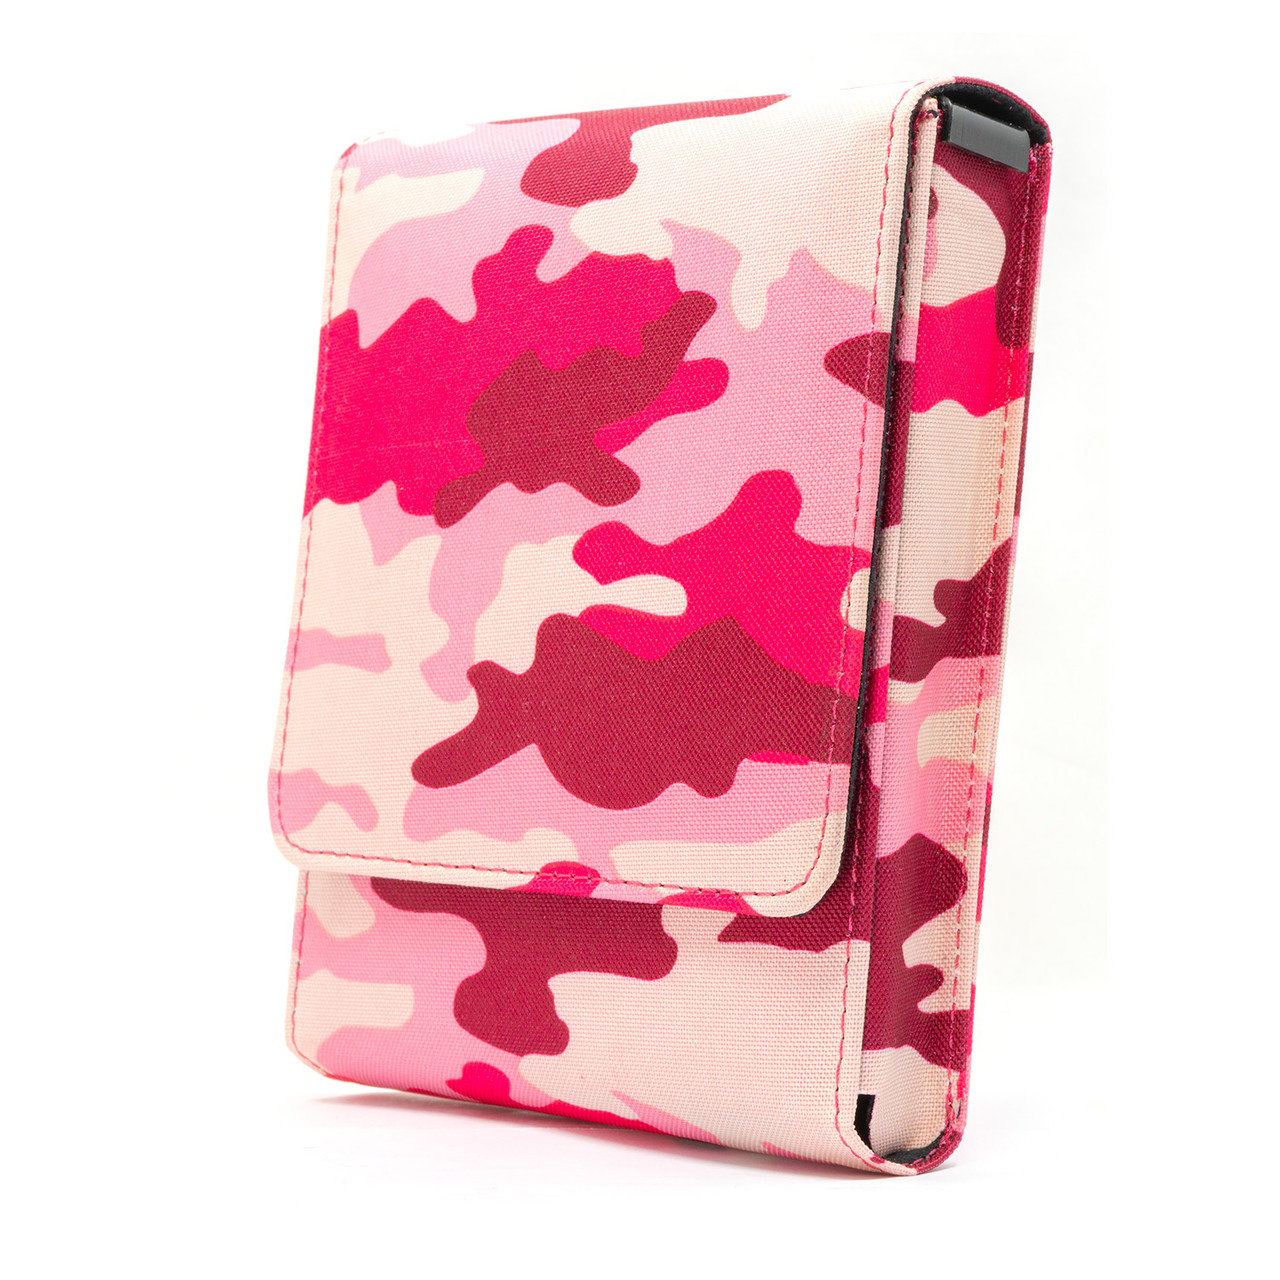 Pink Camouflage Series Holster for the Glock 43X